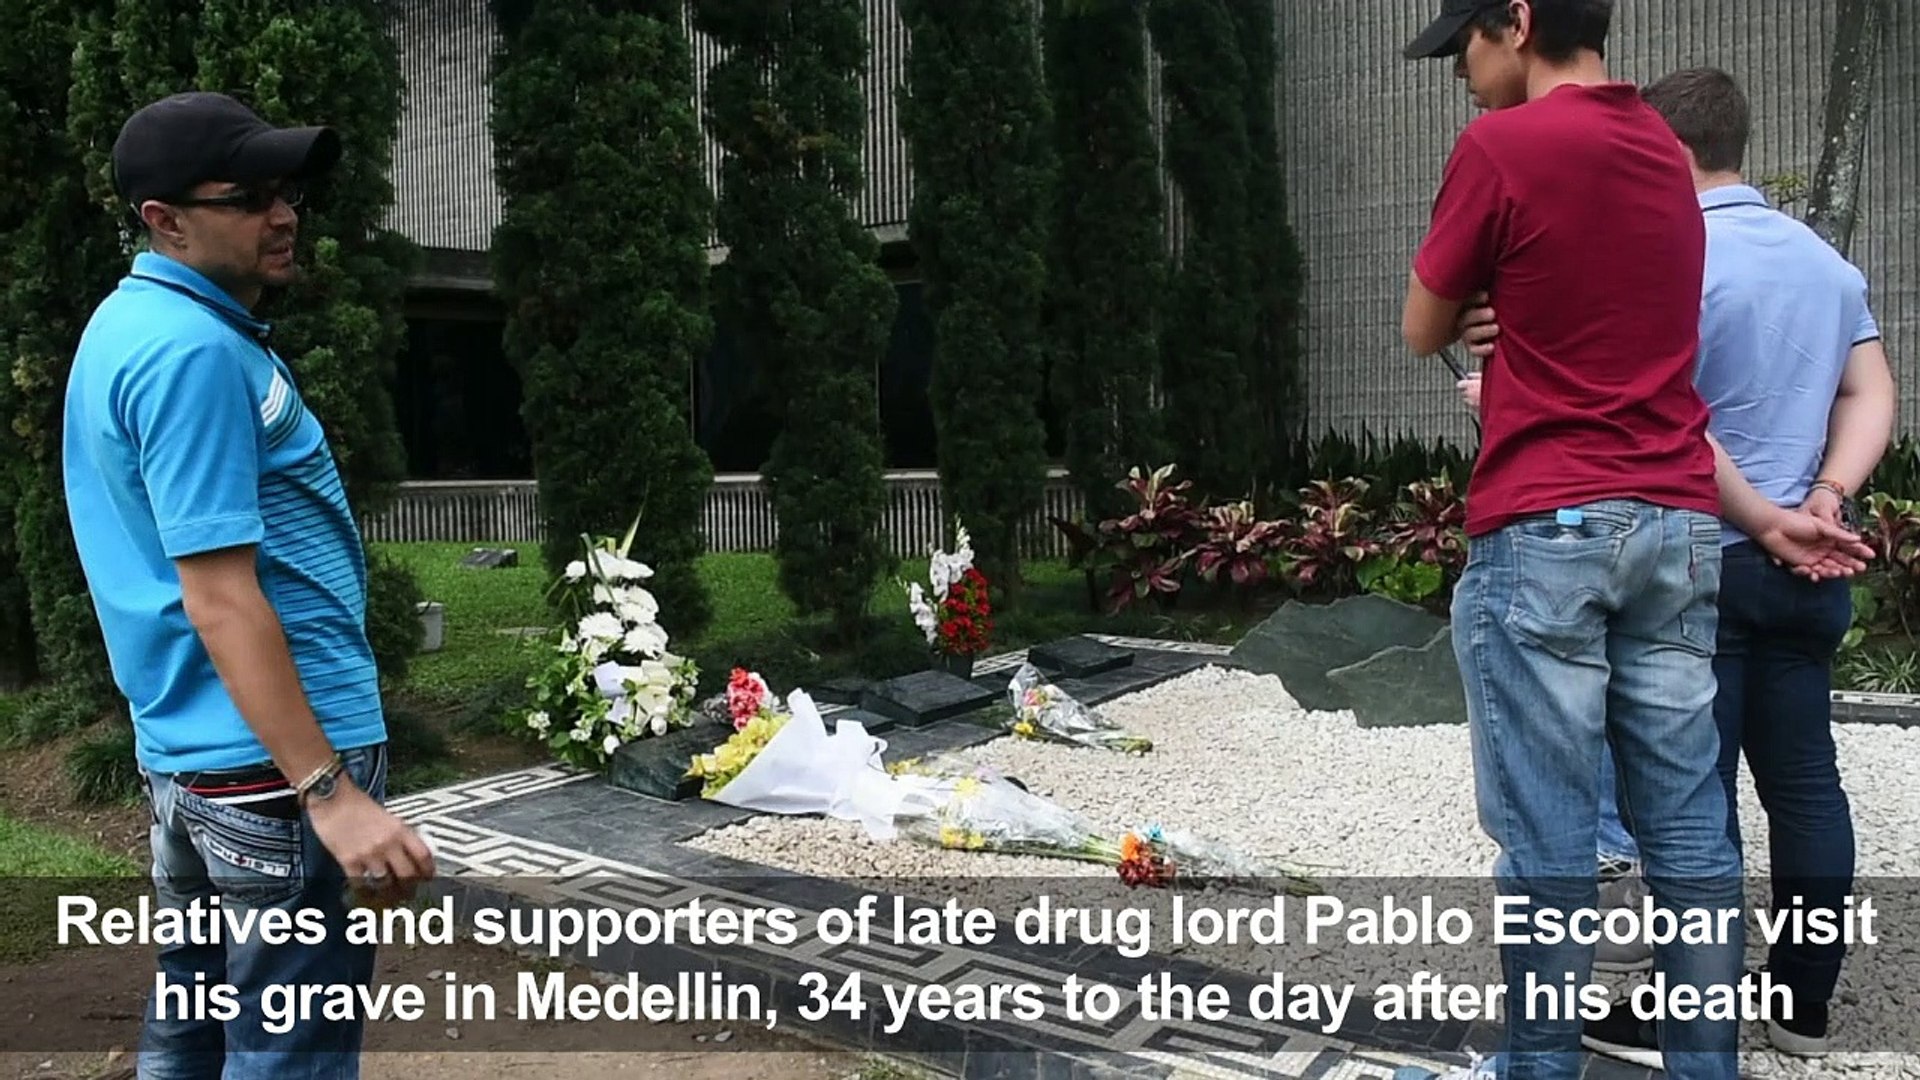 Sister recounts death of Pablo Escobar, 24 years later - Vidéo Dailymotion